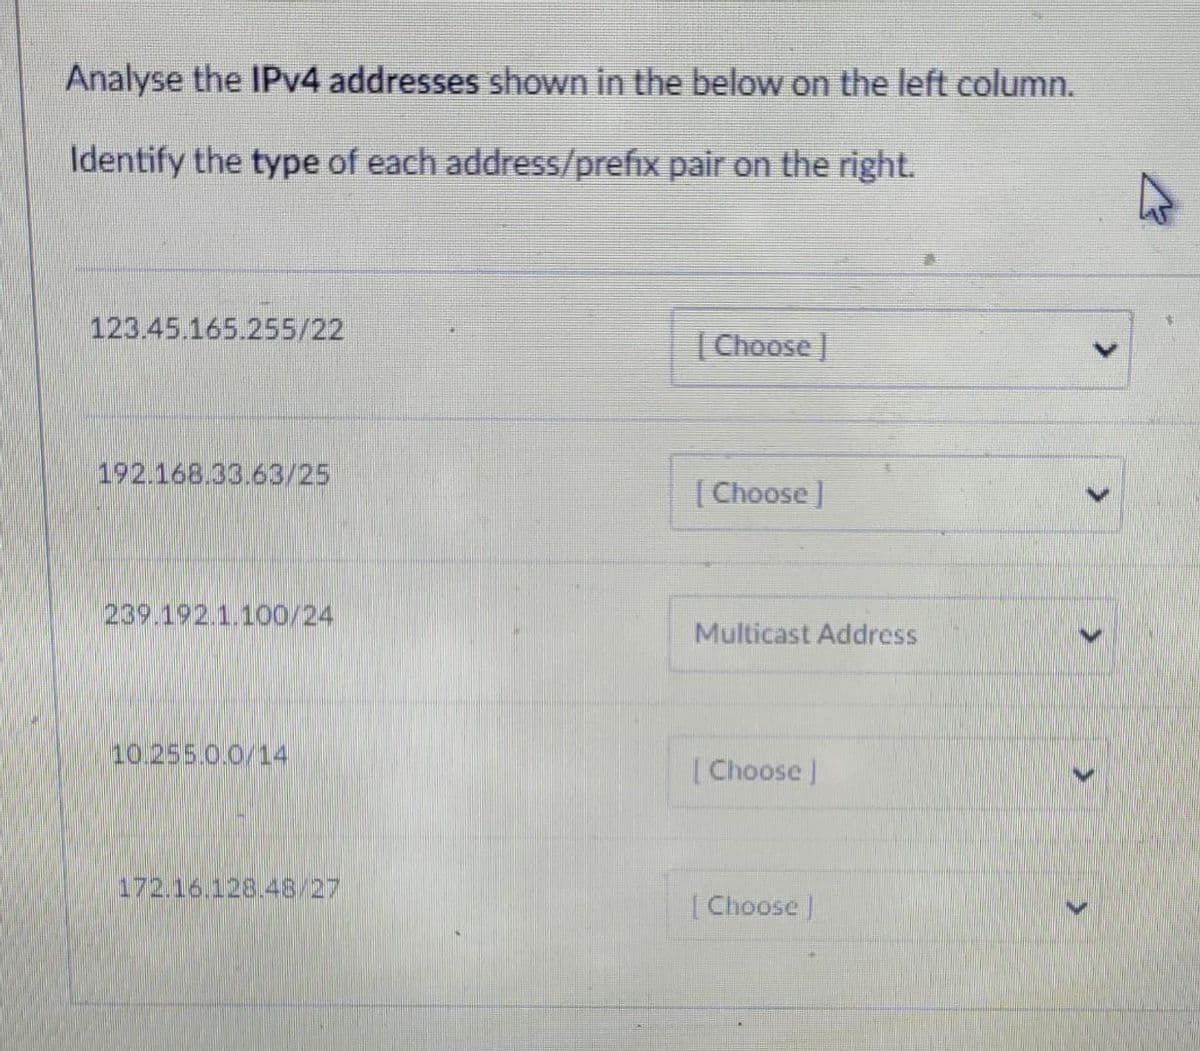 Analyse the IPv4 addresses shown in the below on the left column.
Identify the type of each address/prefix pair on the right.
123.45.165.255/22
192.168.33.63/25
239.192.1.100/24
10.255.0.0/14
172.16.128.48/27
[Choose ]
[Choose ]
Multicast Address
[Choose ]
[Choose ]
>